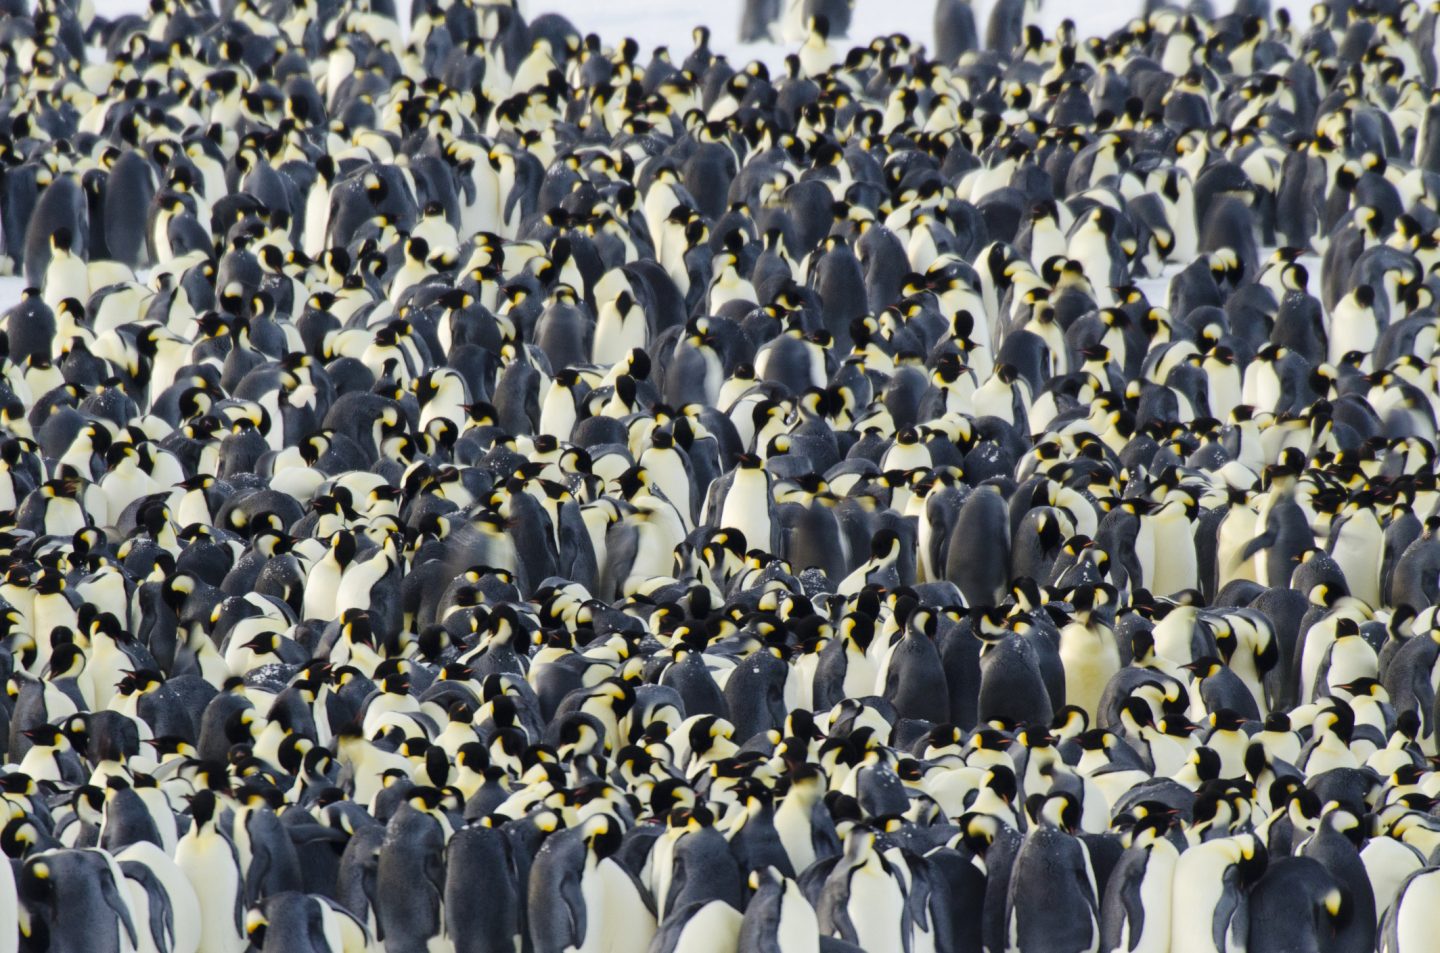 Thousands of Emperor penguins gather to breed.